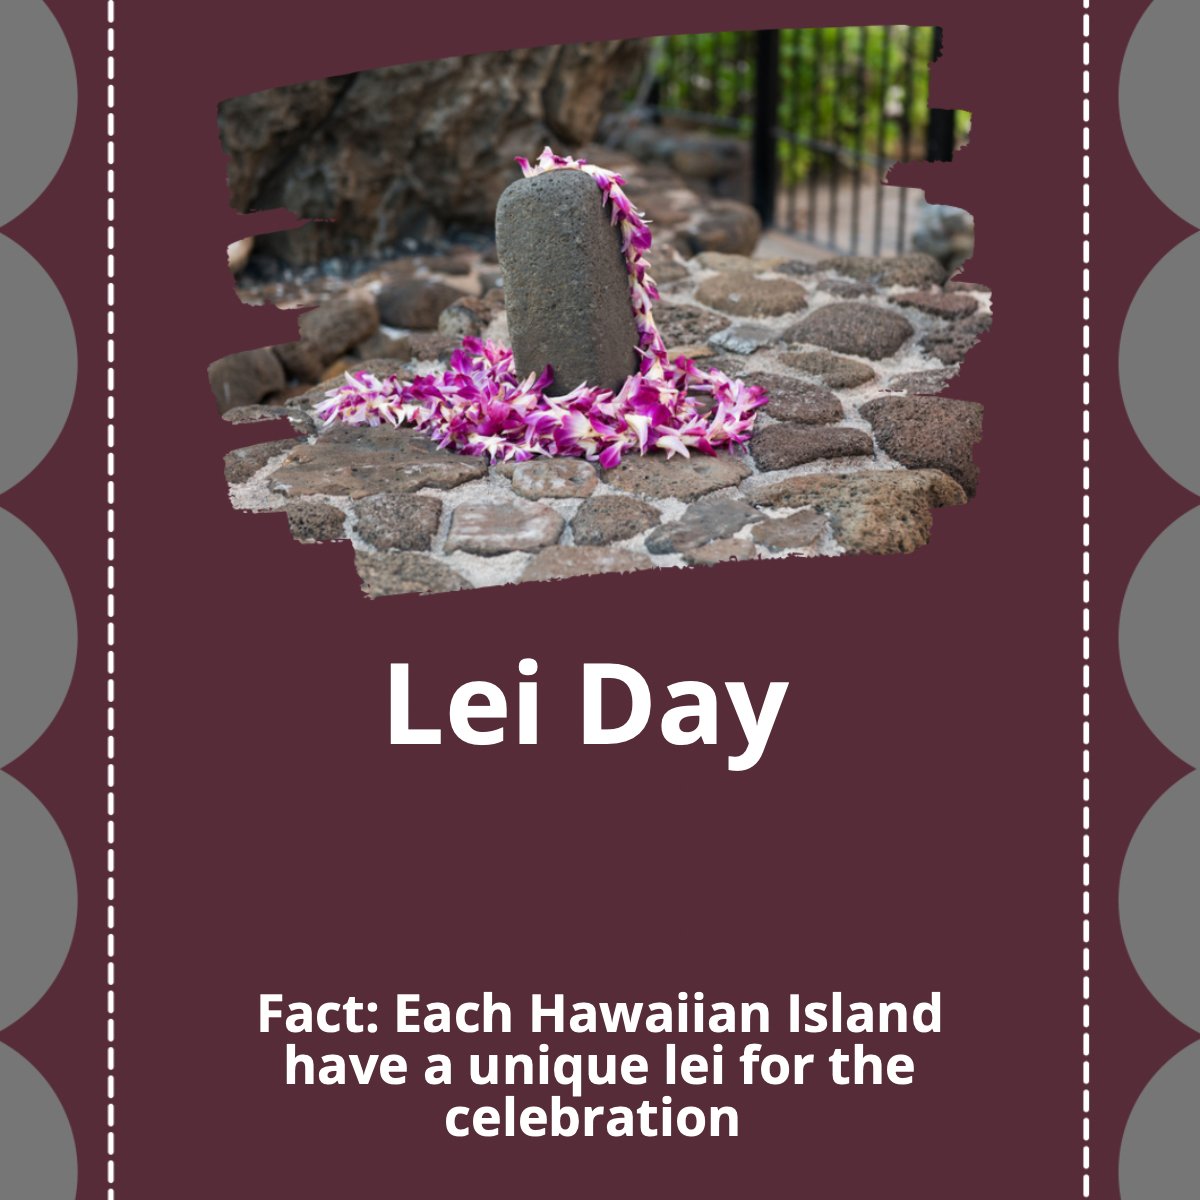 Happy Lei Day to all who celebrate 🙌!

🤔 Did you know? Each Hawaiian island has a unique lei for the celebration.

#lei #day #hawaii #flowers #celebration #grey
 #mainerealestate #homesforsale #floridarealestate #selleragent #buyeragent #listingagent